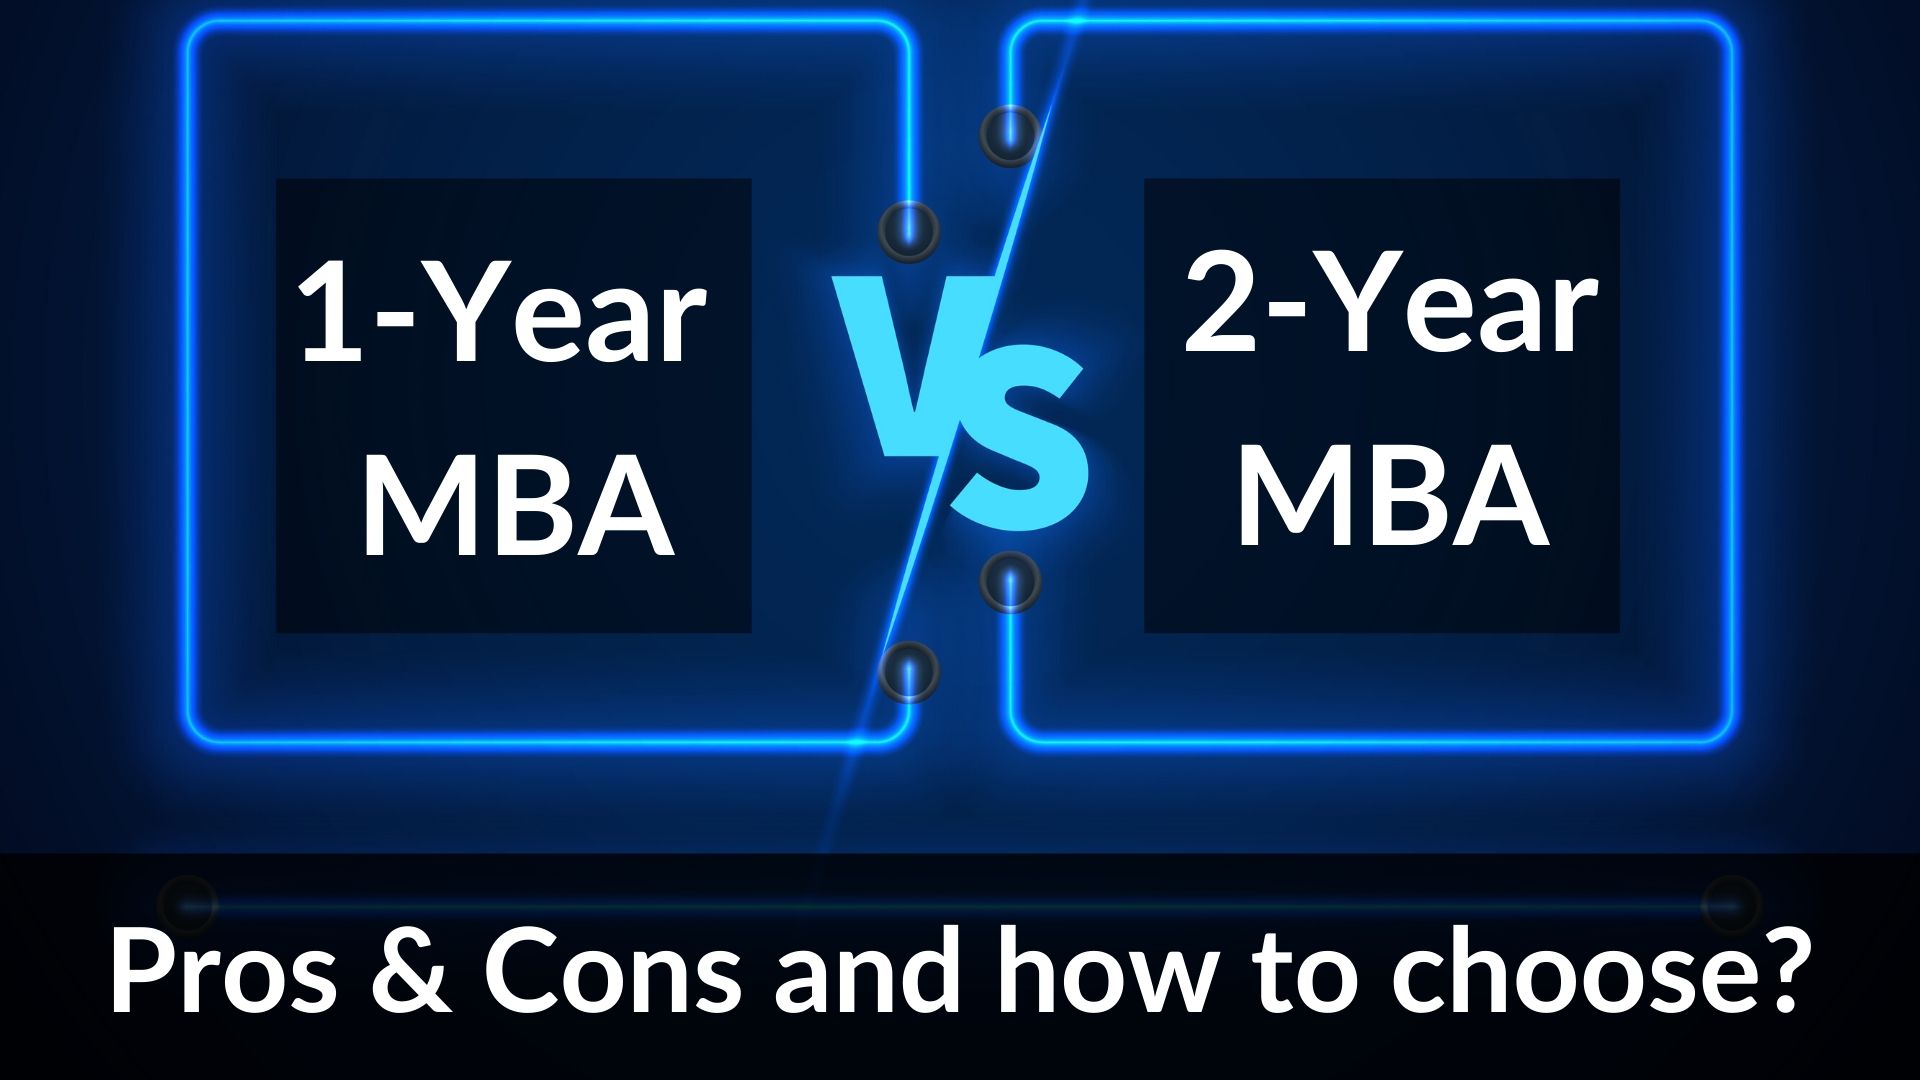 One year MBA vs Two year MBA – Which should you choose?